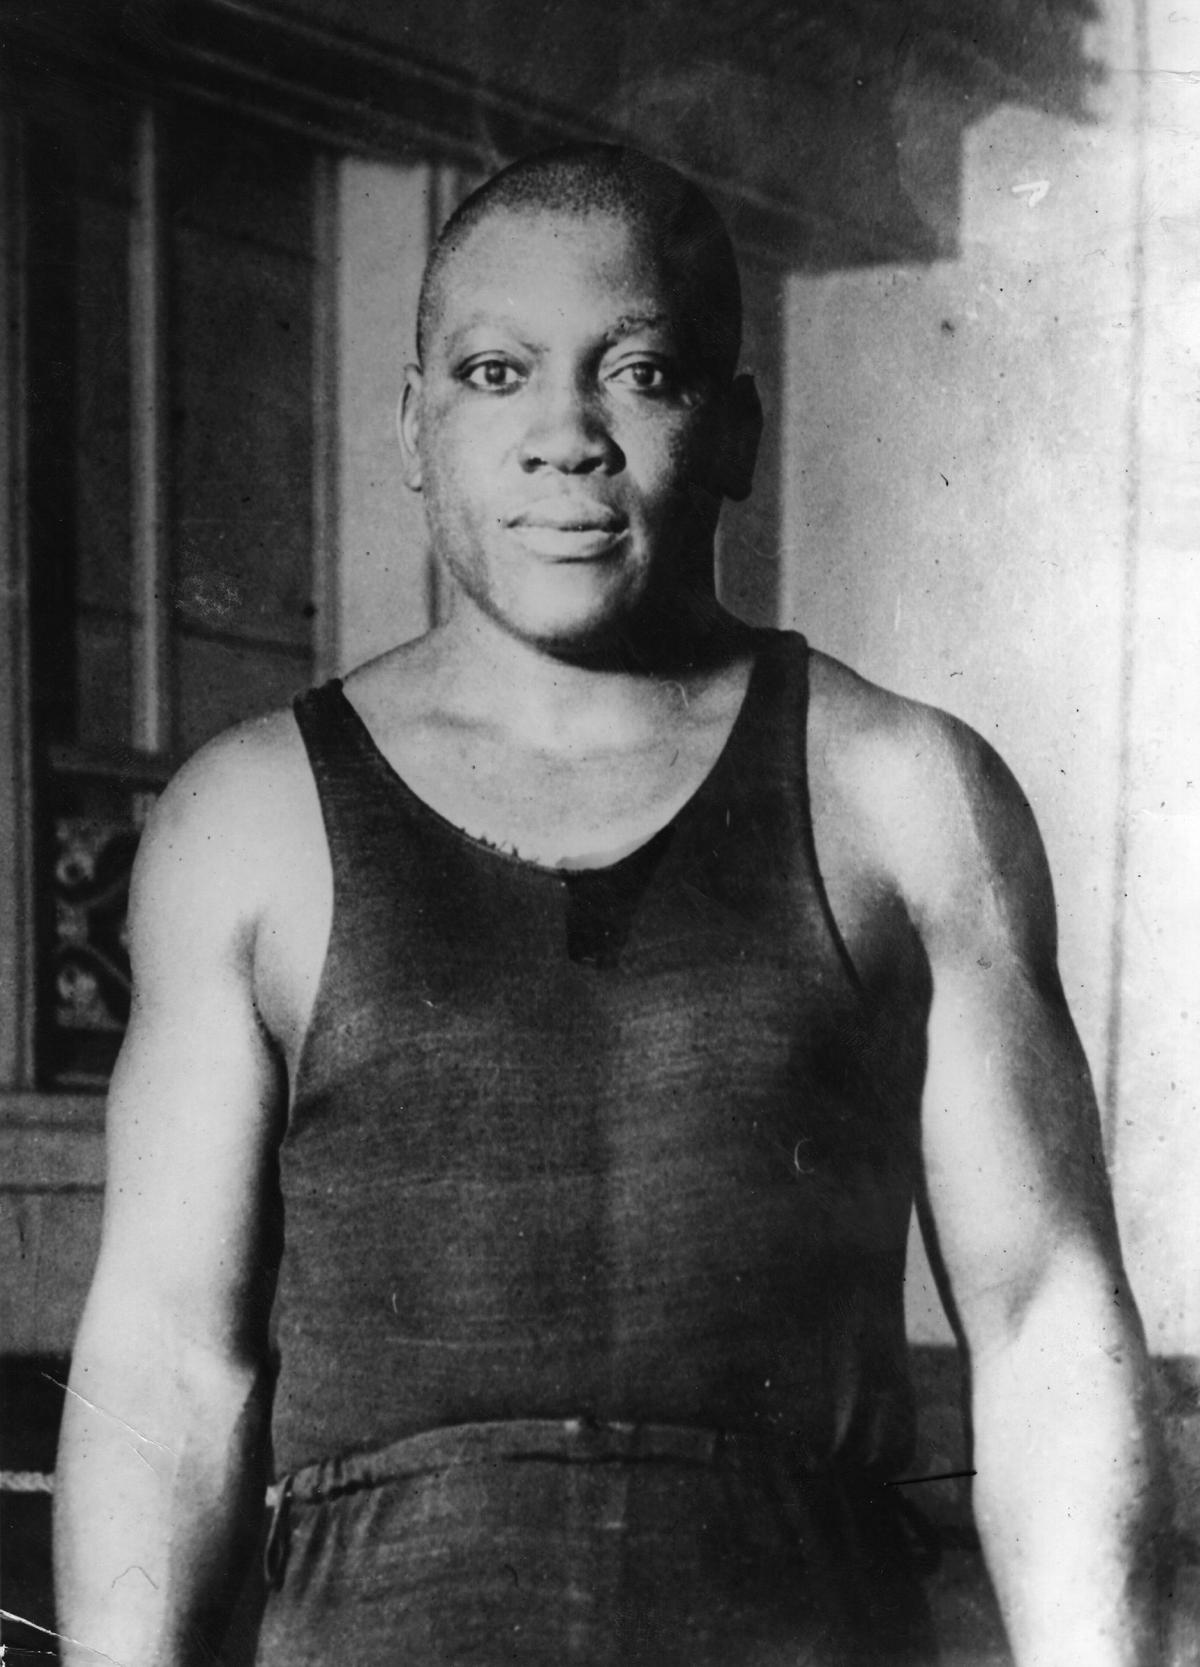 Jack Johnson (1878 - 1946) of the USA, one of the greatest heavyweight boxers of all time. In 1908 he took the world title from Tommy Burns and held on to it until Jess Willard beat him in 1915. (Hulton Archive/Getty Images)